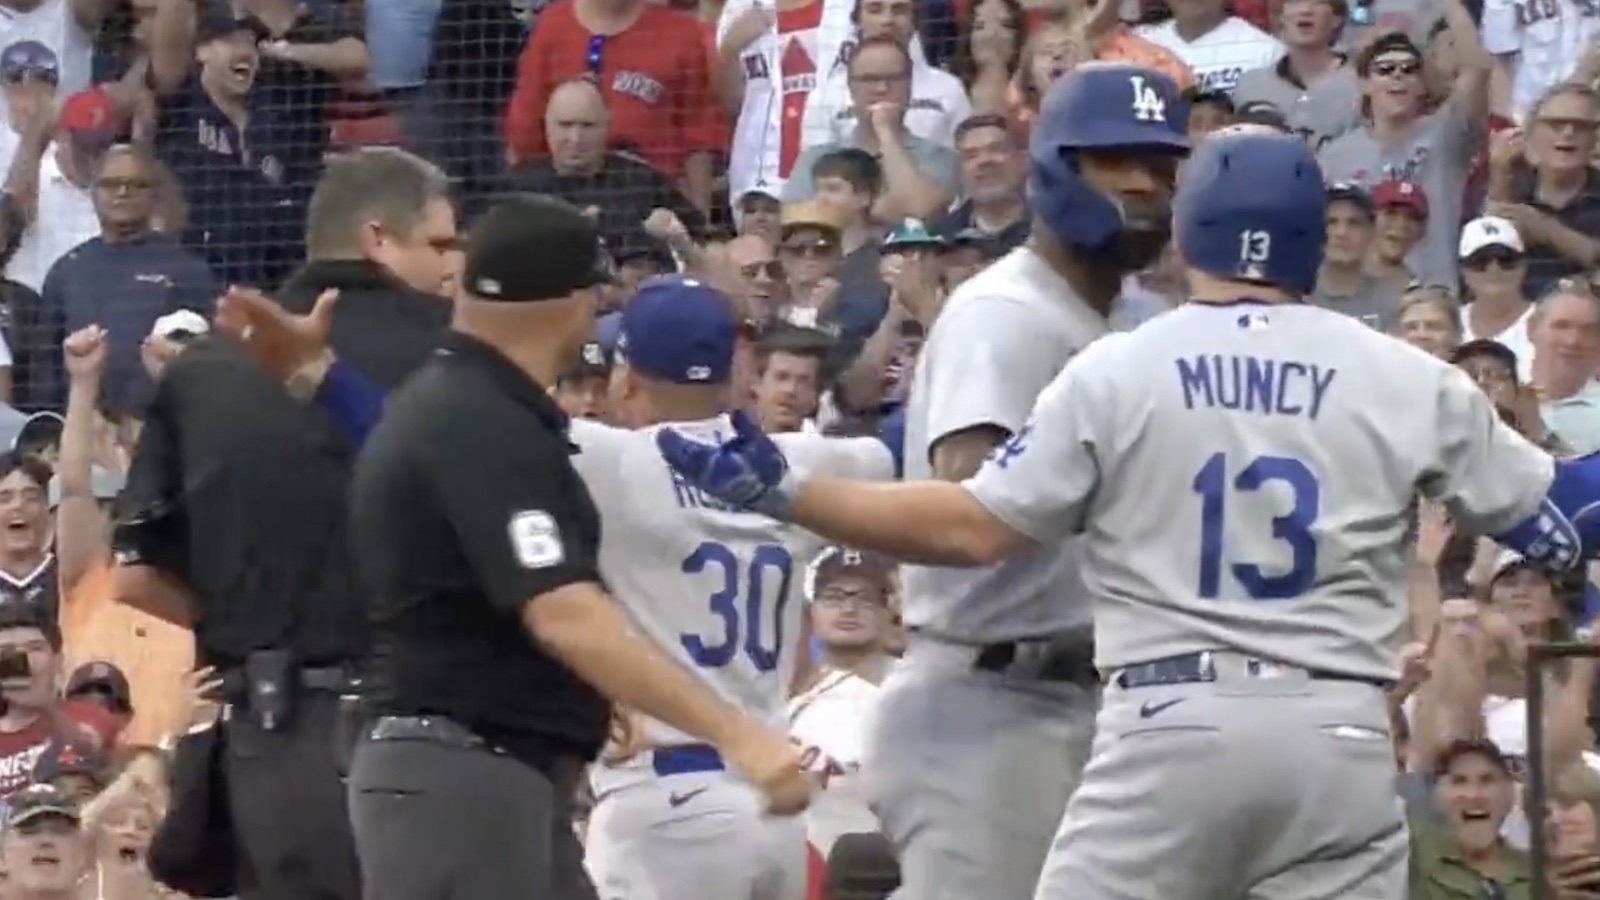 Max Muncy ejected after complaining to umpire Jordan Baker about